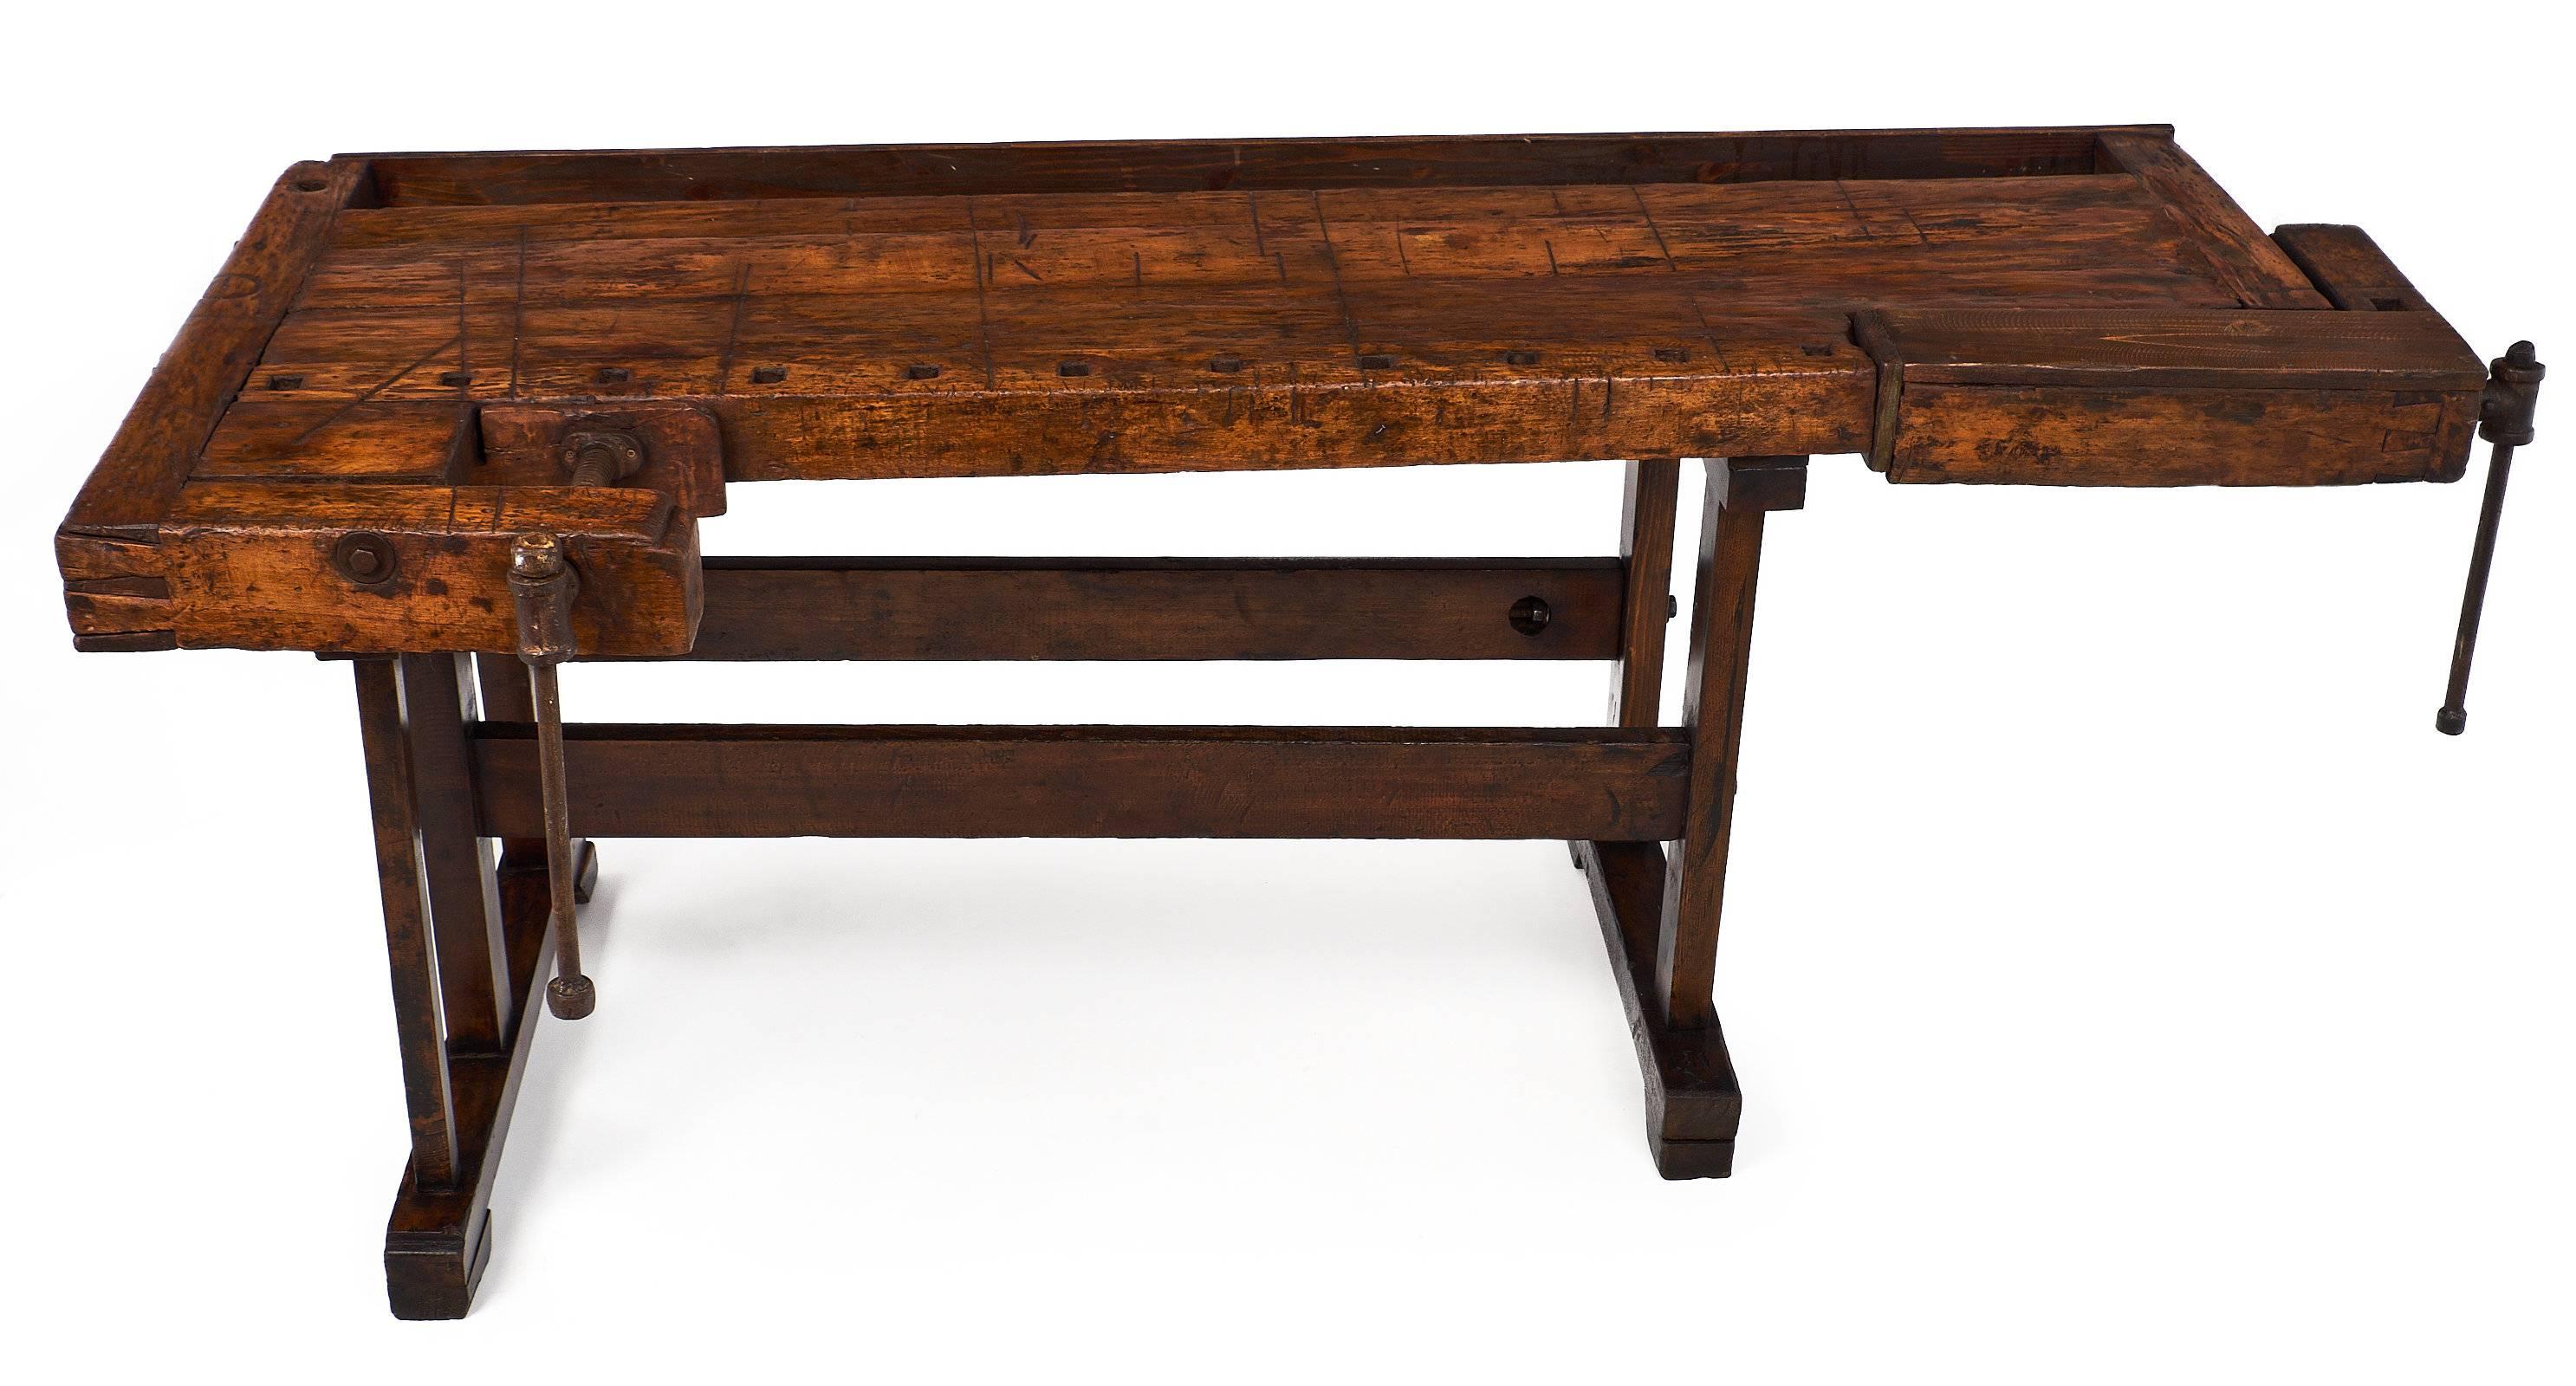 This superb workbench from the French Alps features a stunning patina and many details, circa late 19th century. This table was used to craft some of the first wooden skis. The large piece is very impressive in size and has moving pieces with